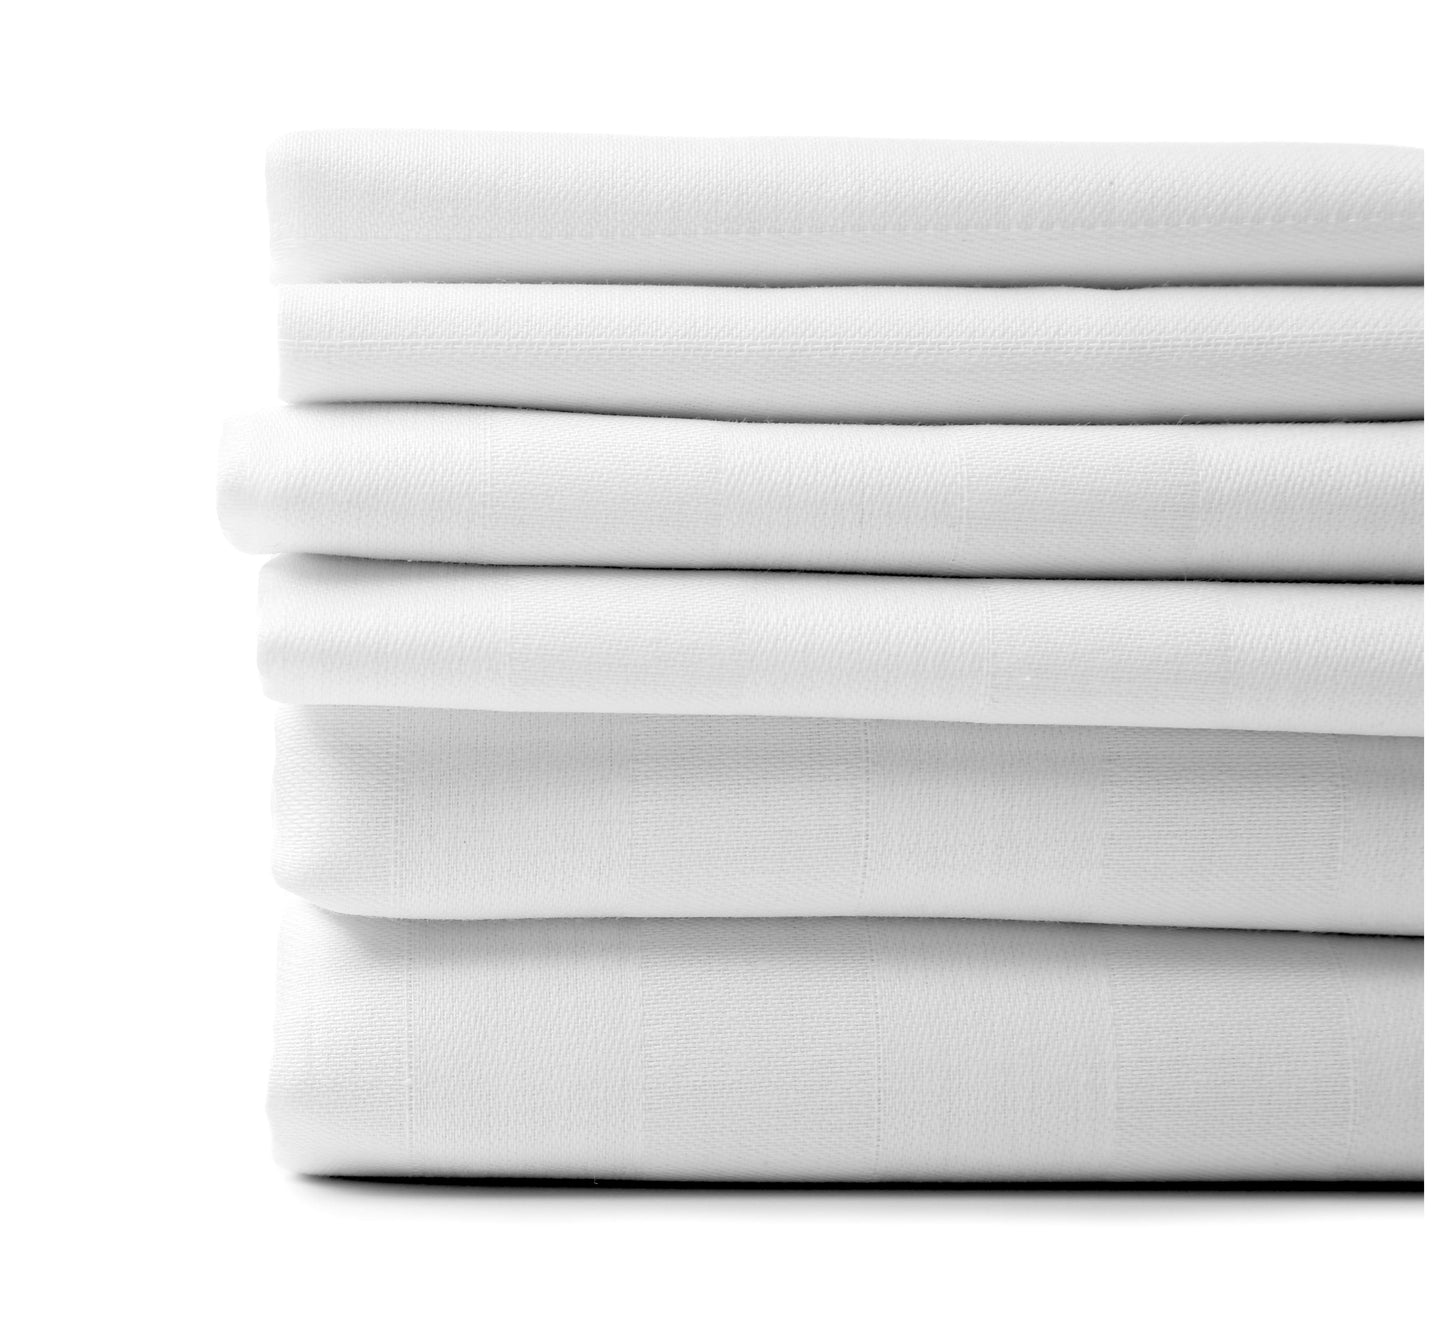 Percale Fitted Sheet OLIVIA ROCCO Fitted Sheet